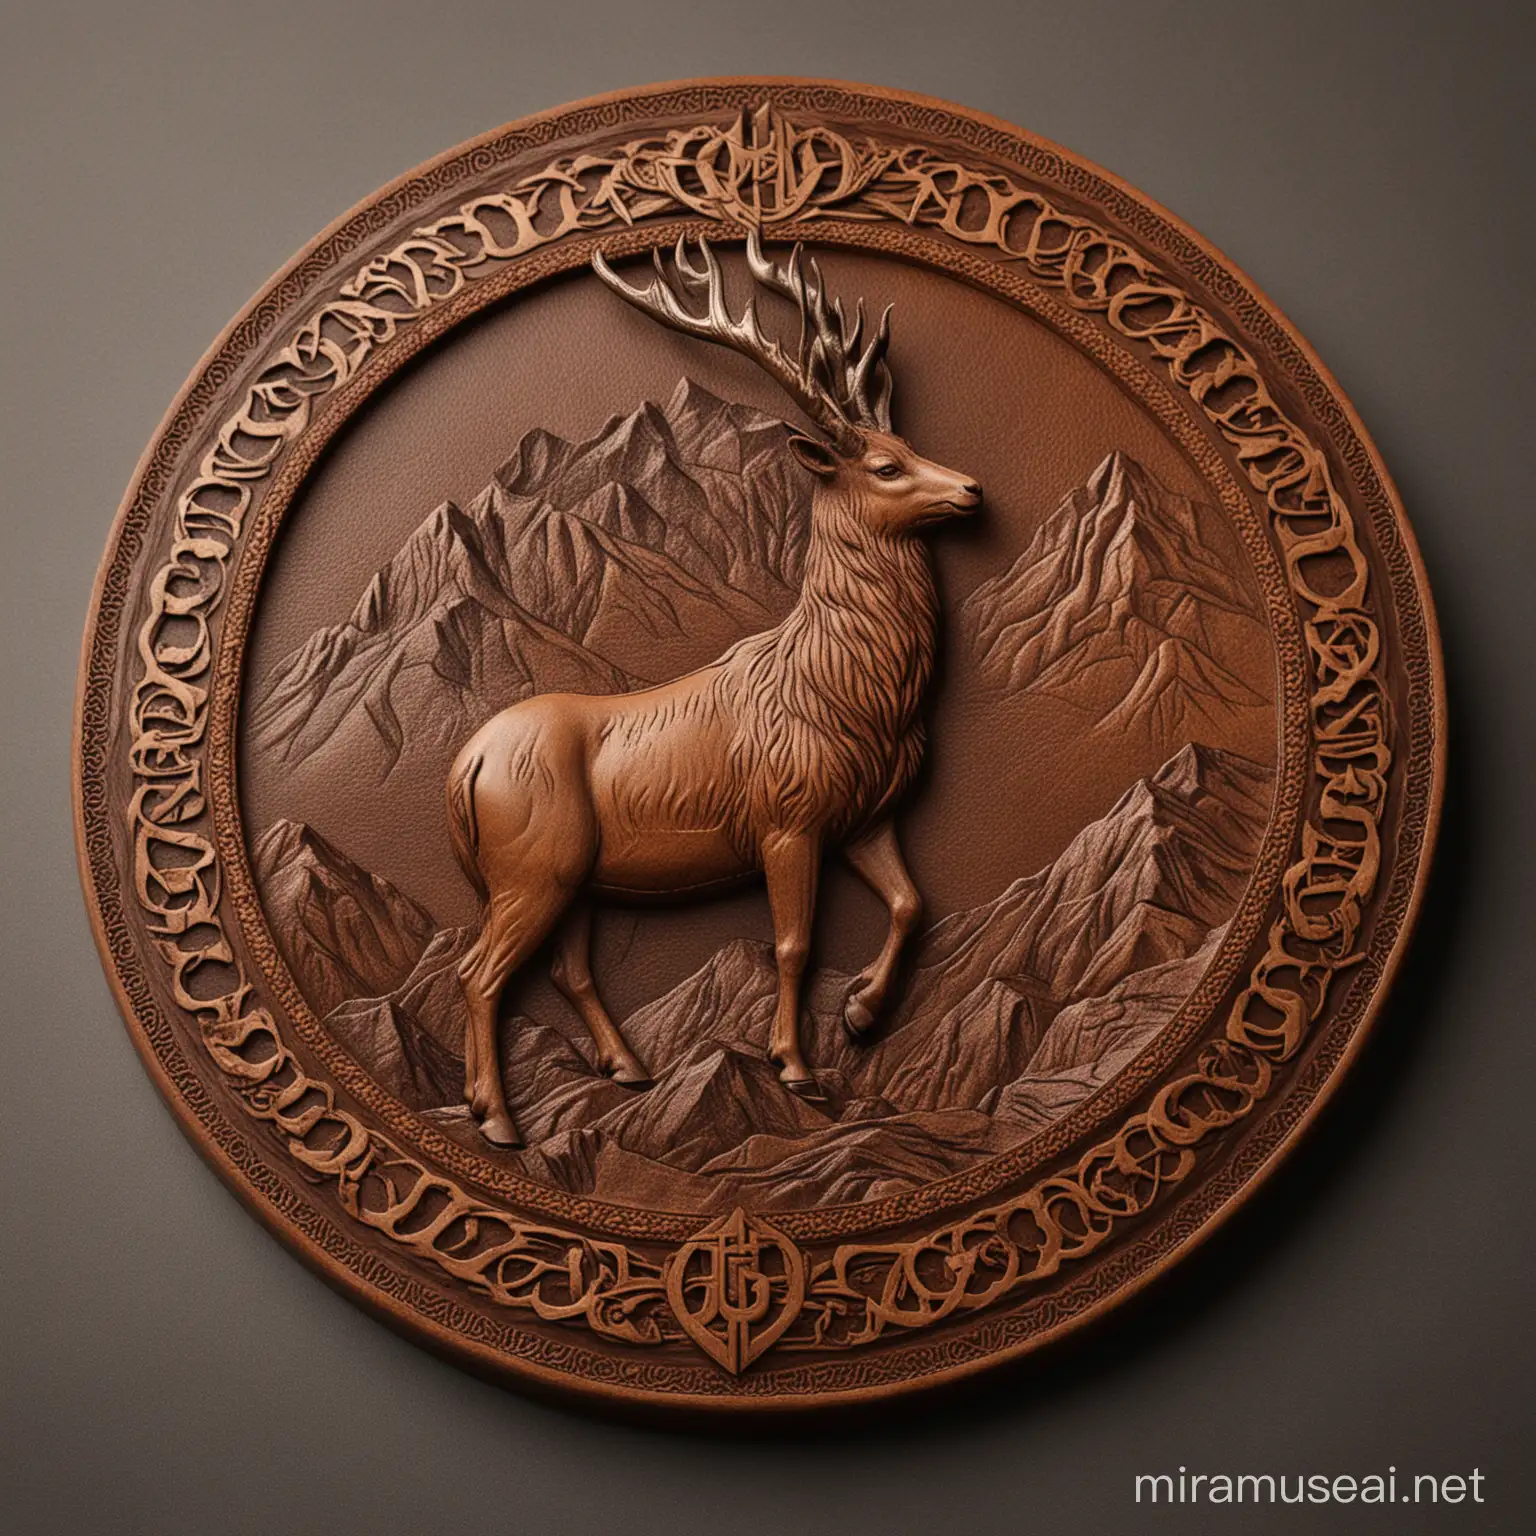 Majestic Markhor Mountain Emblem Featuring Leather Shire Branding